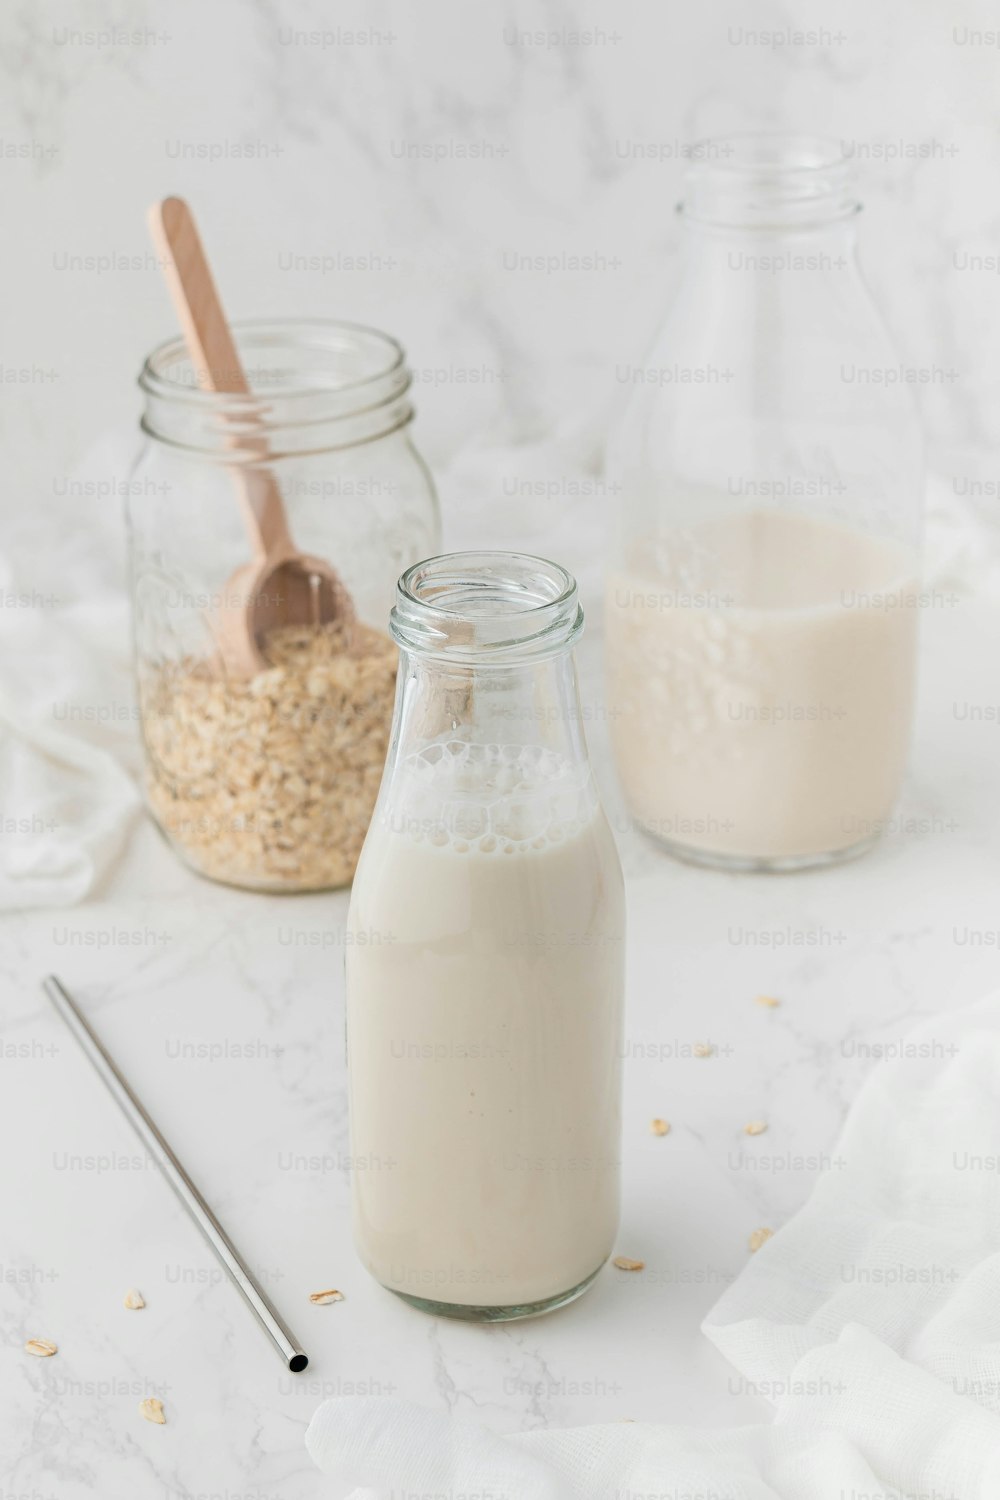 a glass jar filled with oatmeal next to a bottle of milk